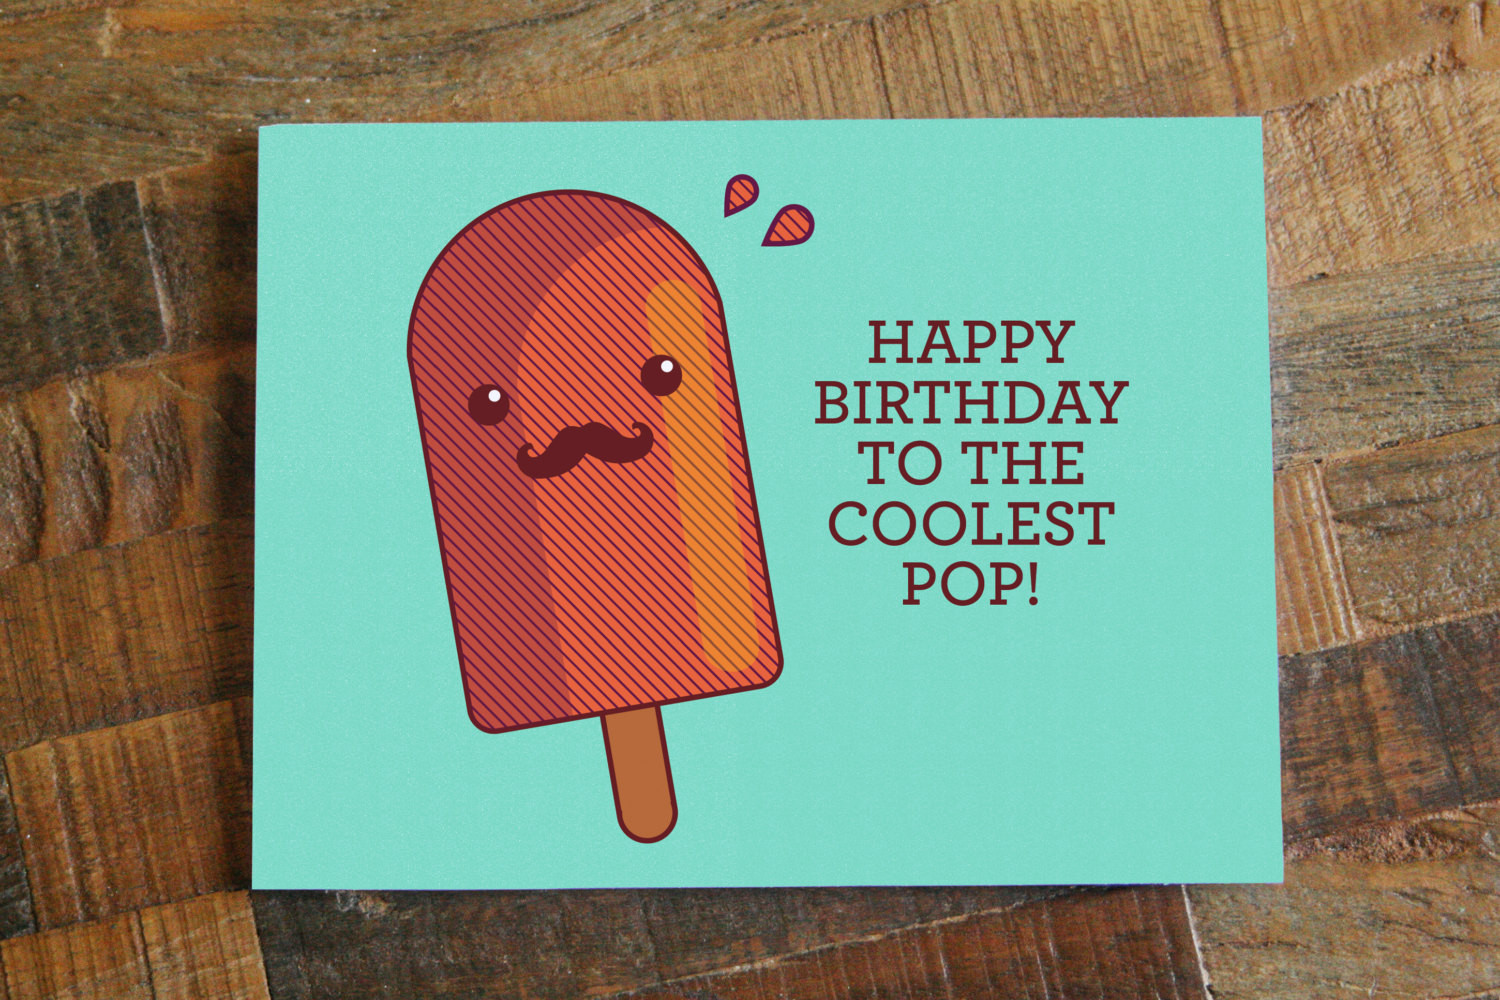 Birthday Card Ideas For Dad
 Things You Can Do To Celebrate Your Dad’s Birthday